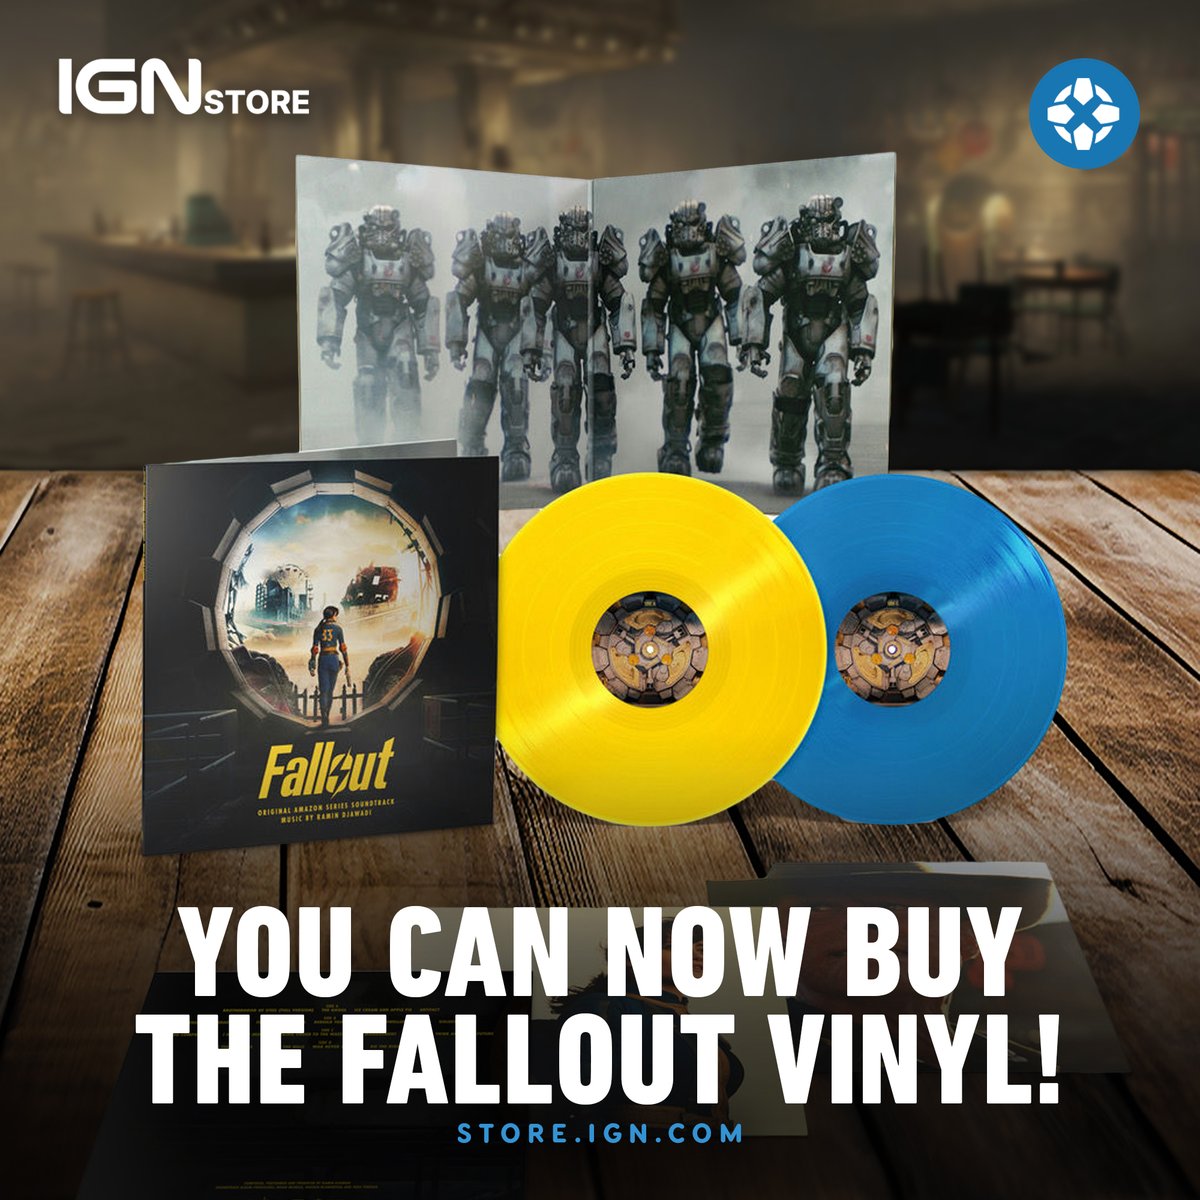 In Prime Video's Fallout show, Ramin Djawadi's echoing soundscapes and ominous orchestral flourishes create a dark, industrial backdrop to the post-apocalyptic series.

Get the Fallout vinyl on @IGNStore: bit.ly/4btB6kE